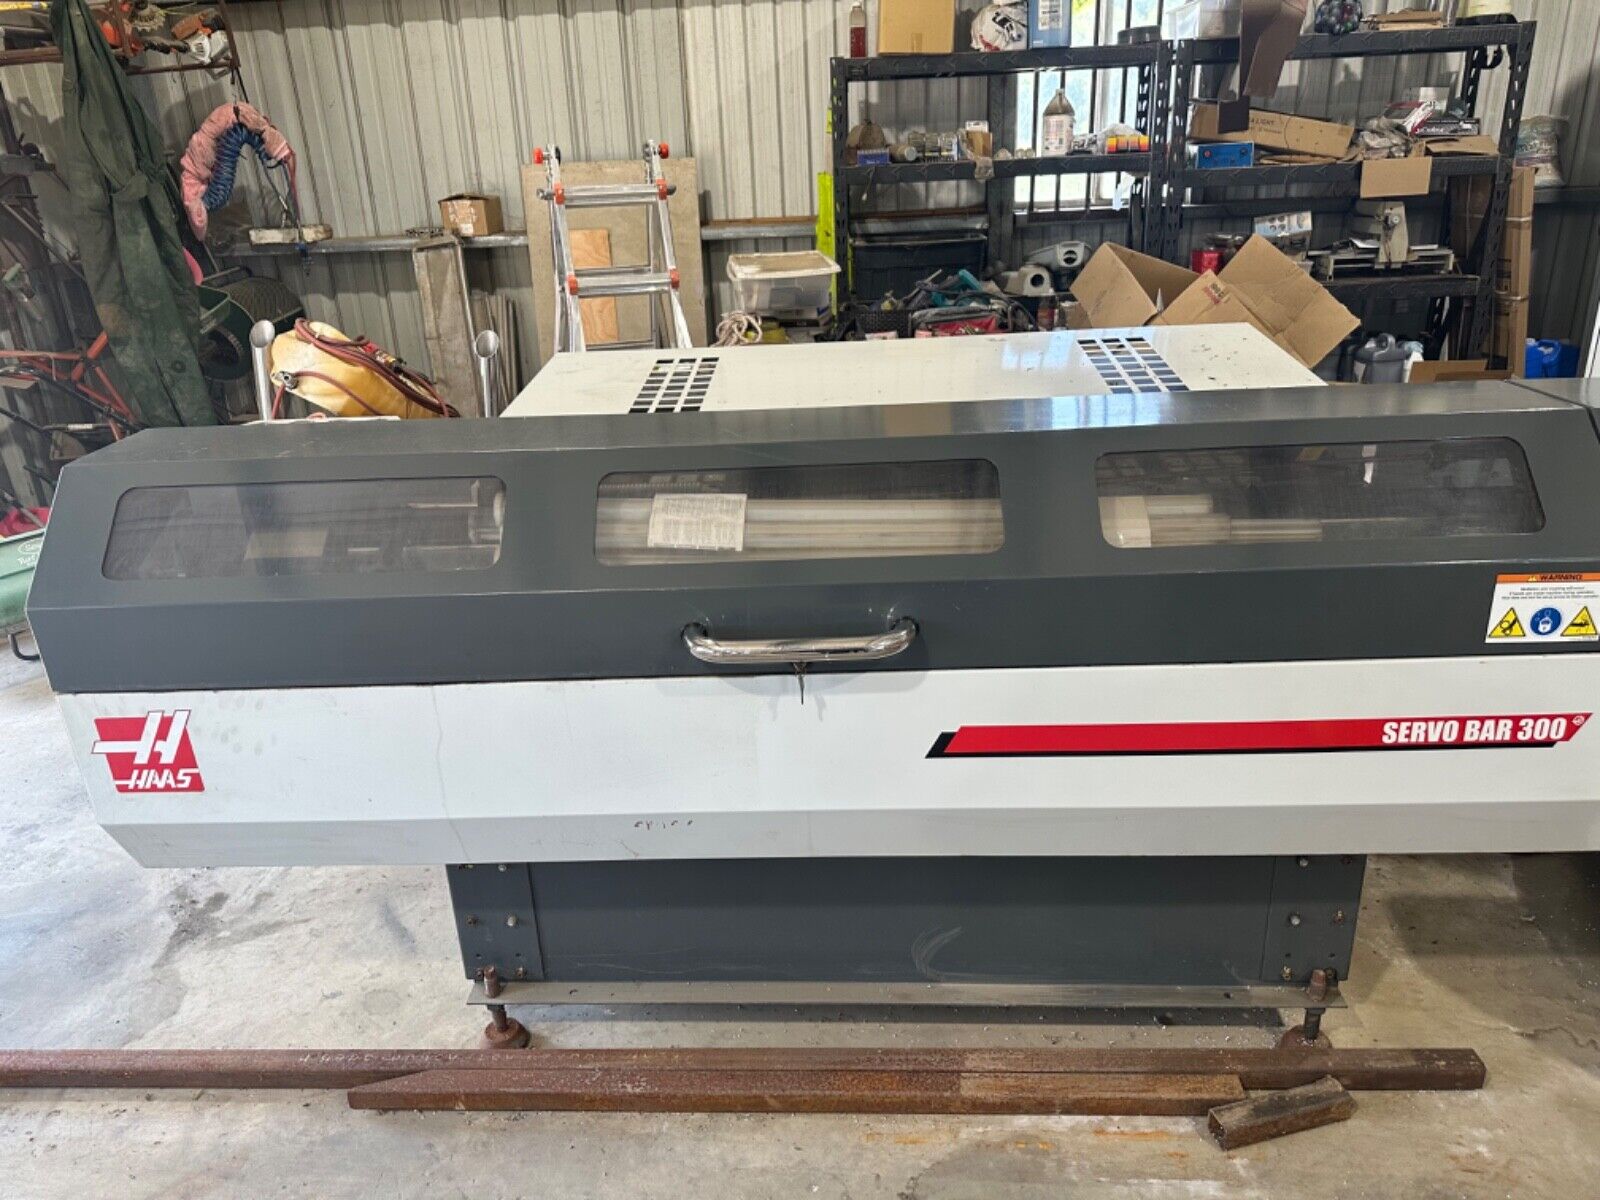  2012 haas servo bar feeder gently used can take up to inch and 1/2 bar.